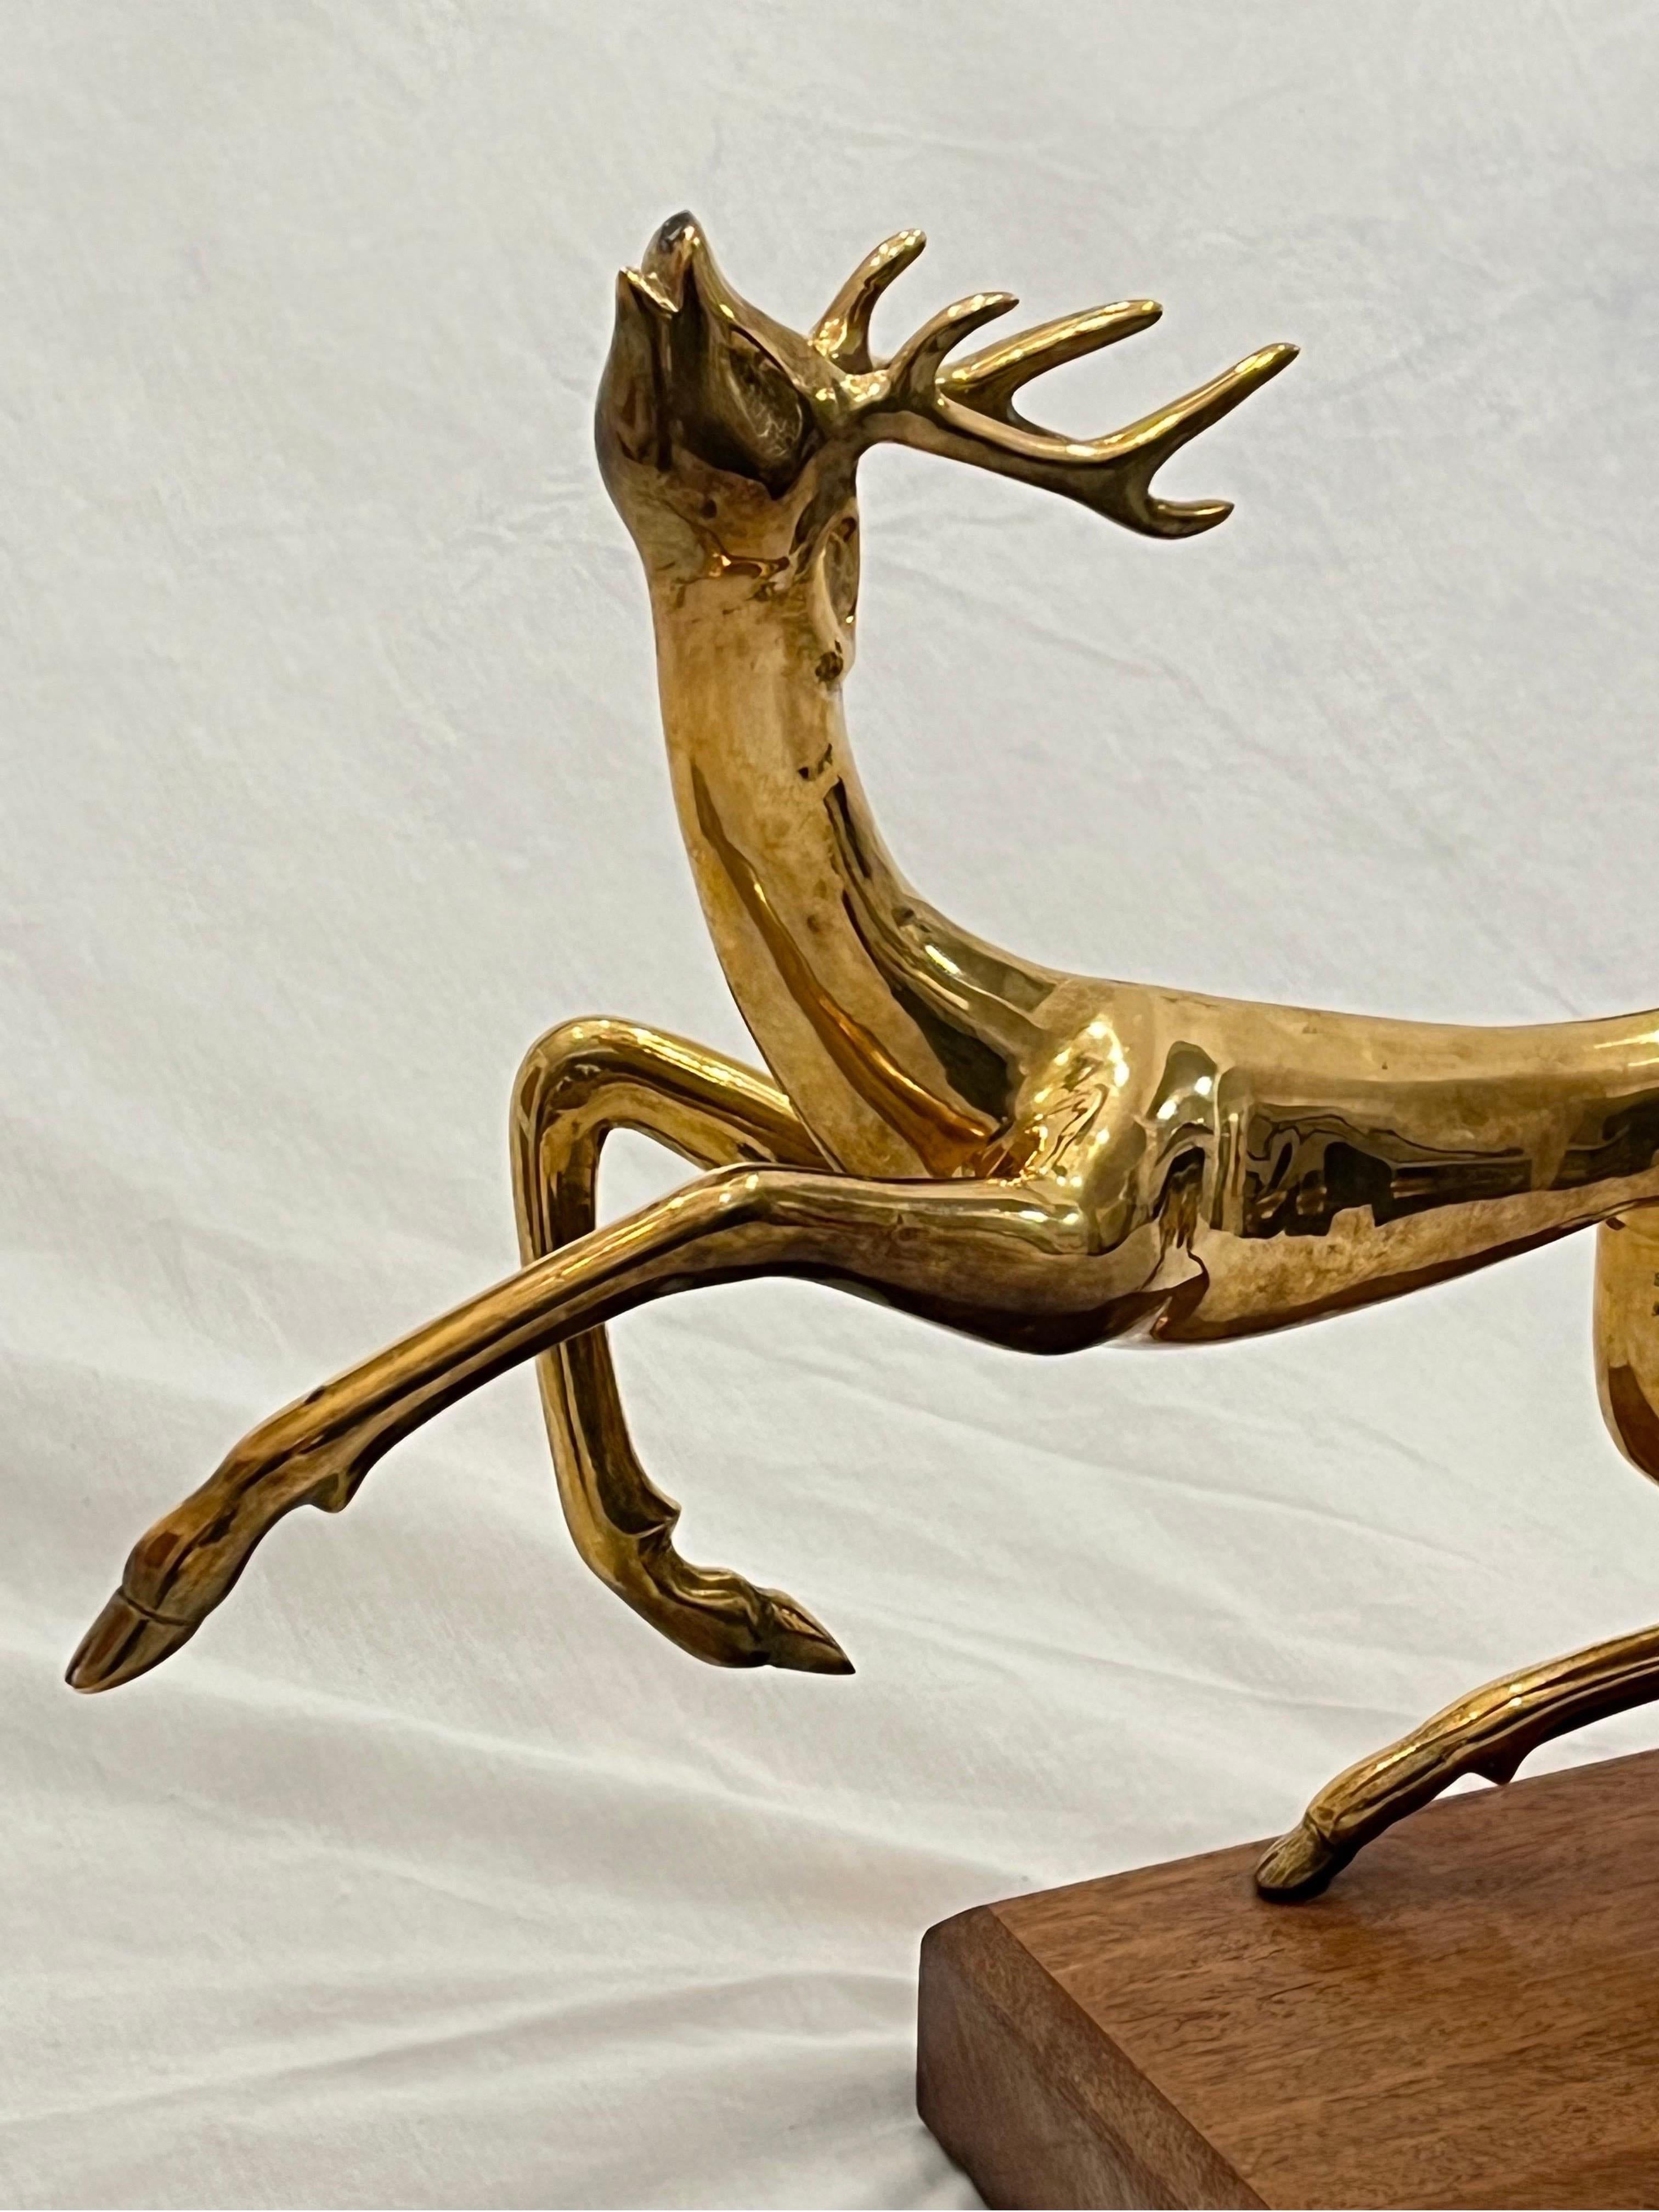 Vintage Thai Somchai Hattakitkosol Signed Solid Bronze Sculpture of Leaping Deer For Sale 7